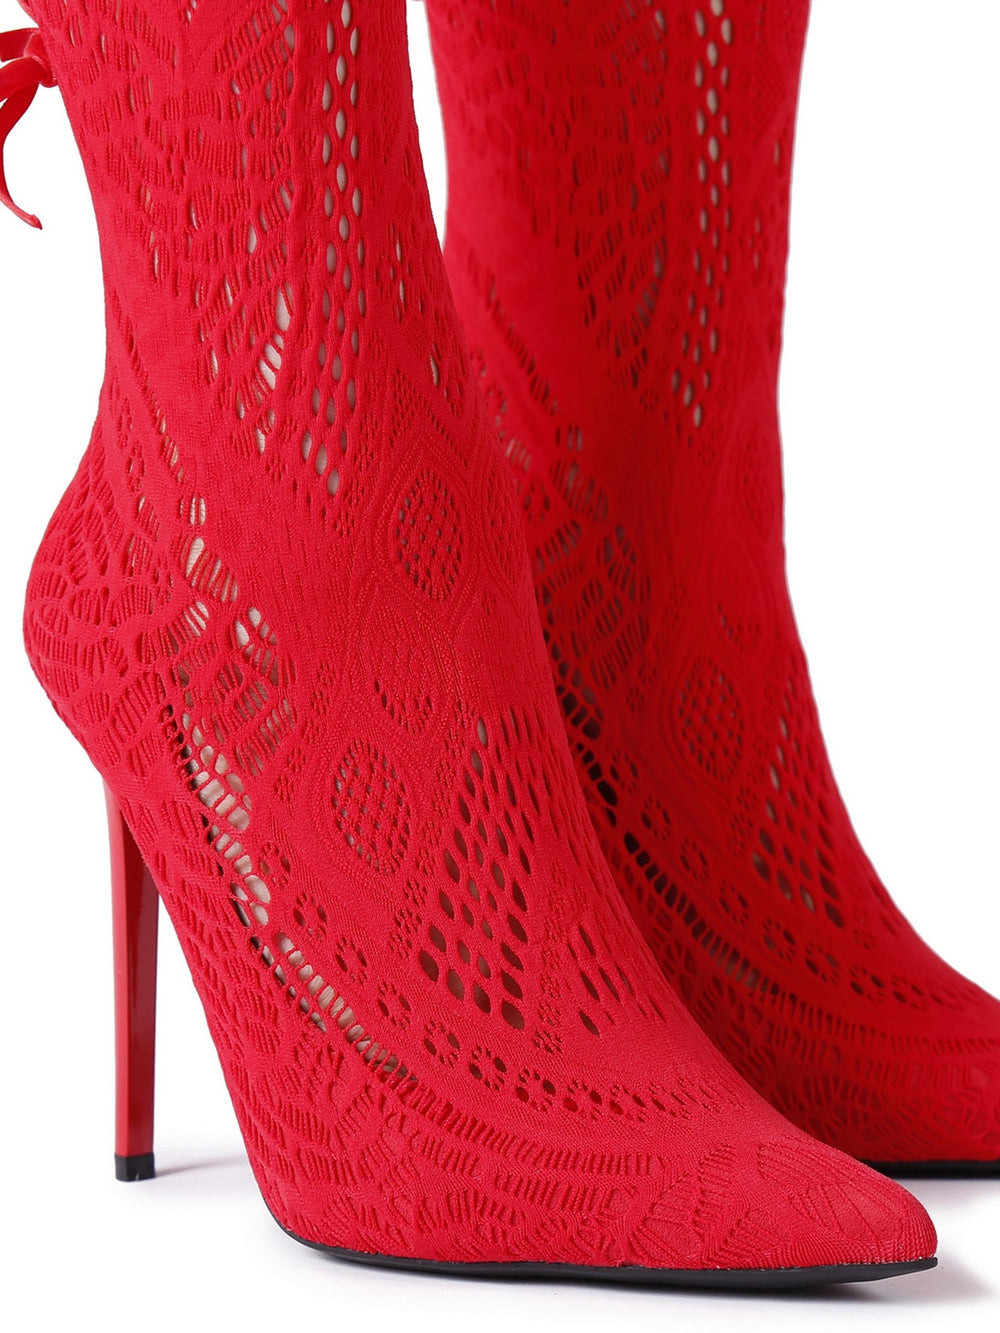 Red Thigh High Sephie Boots - Honour Clothing